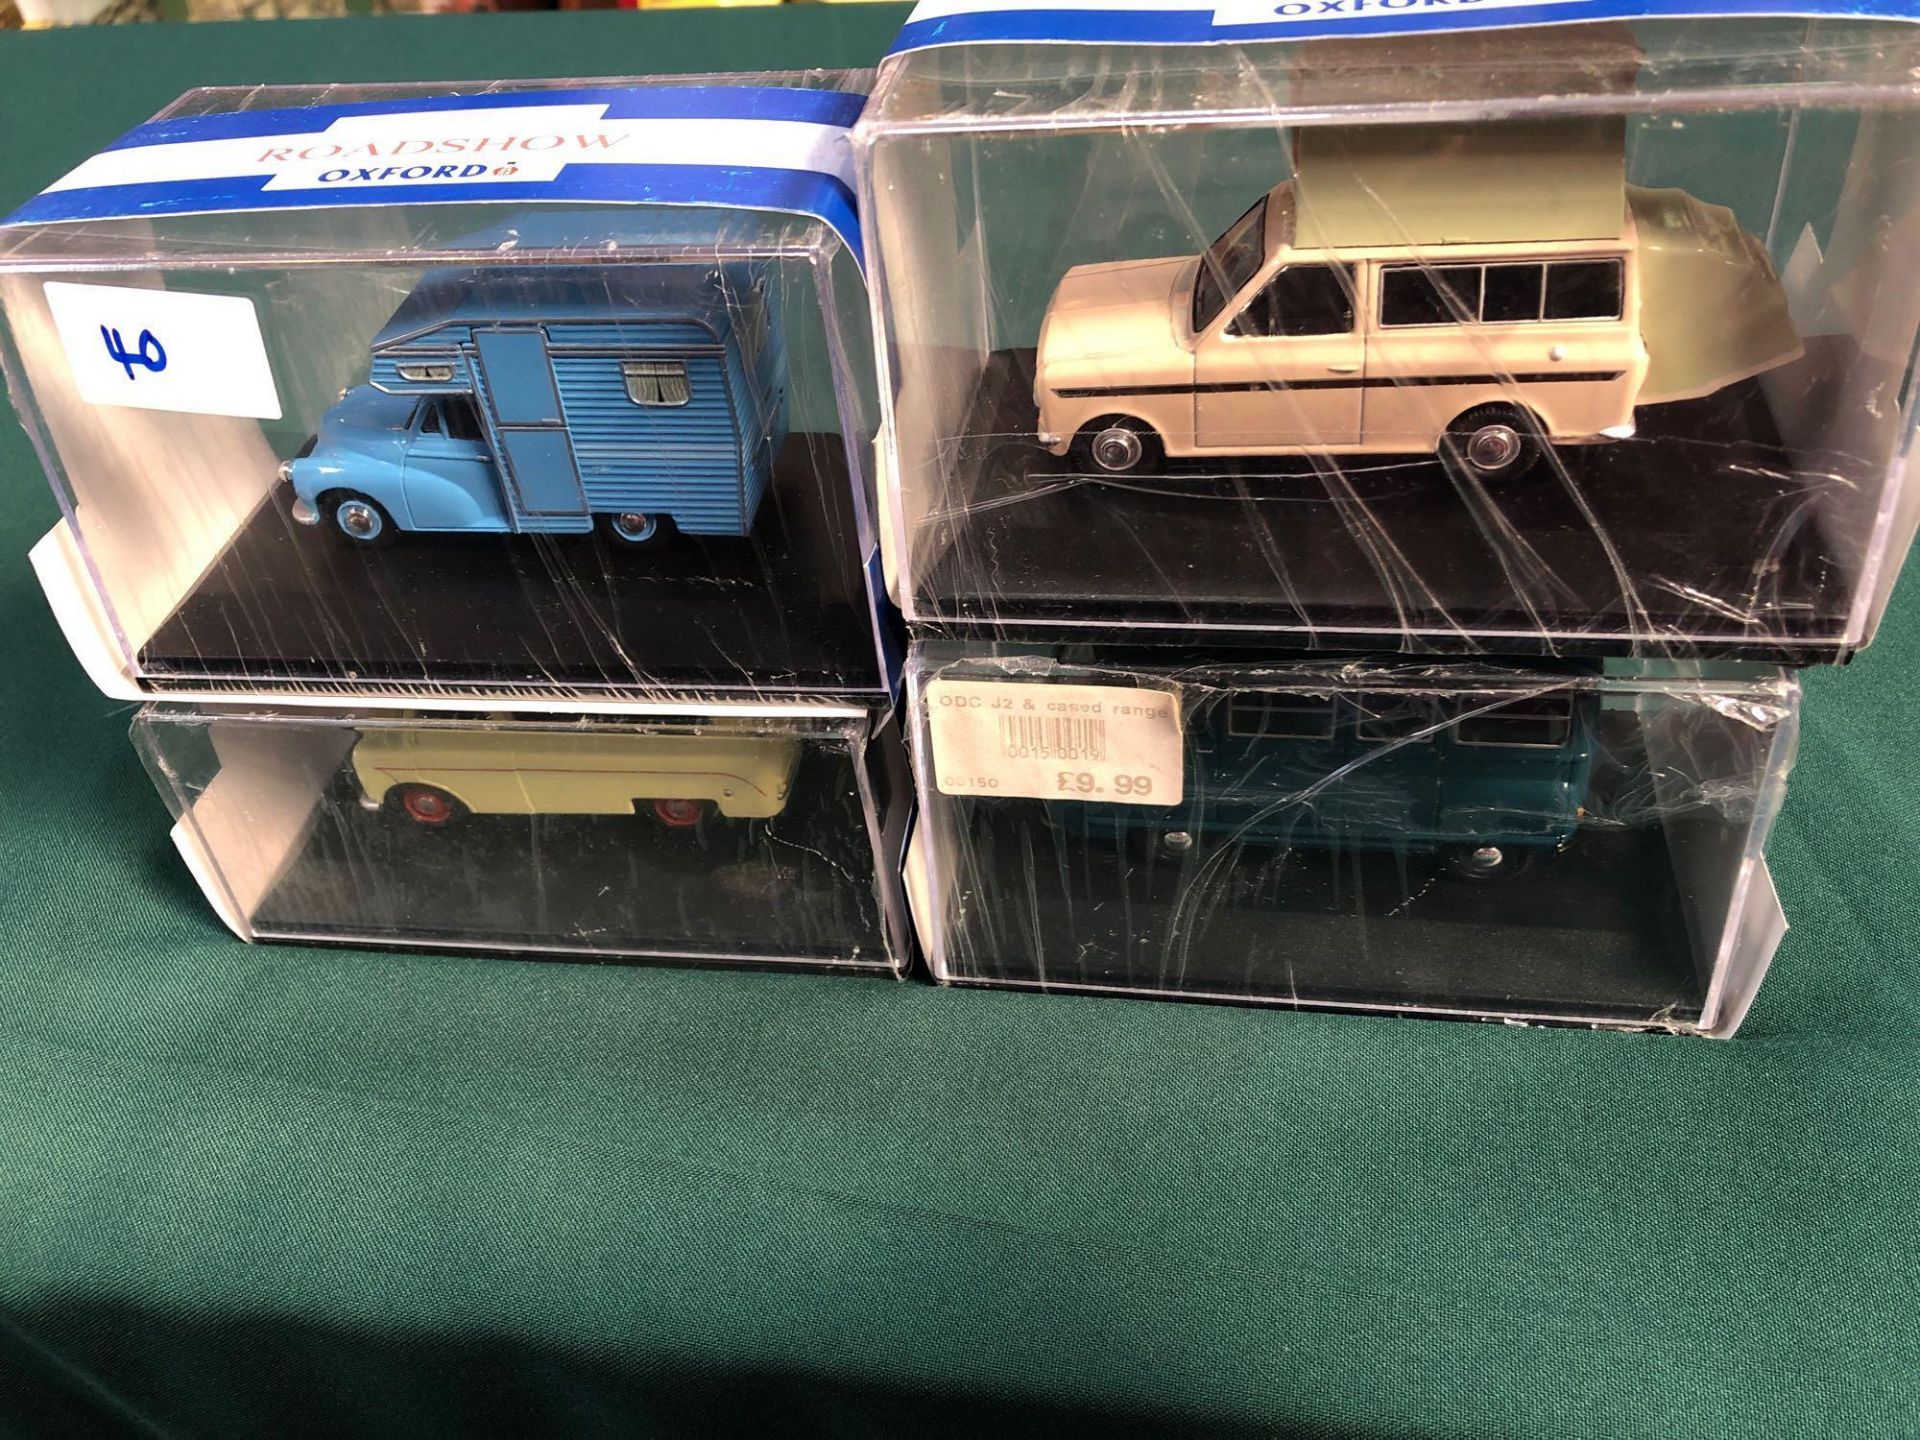 4x Oxford Diecast Models All On Display Boxes, Comprising Of; #HA004 Camper Certificate 0166 Of